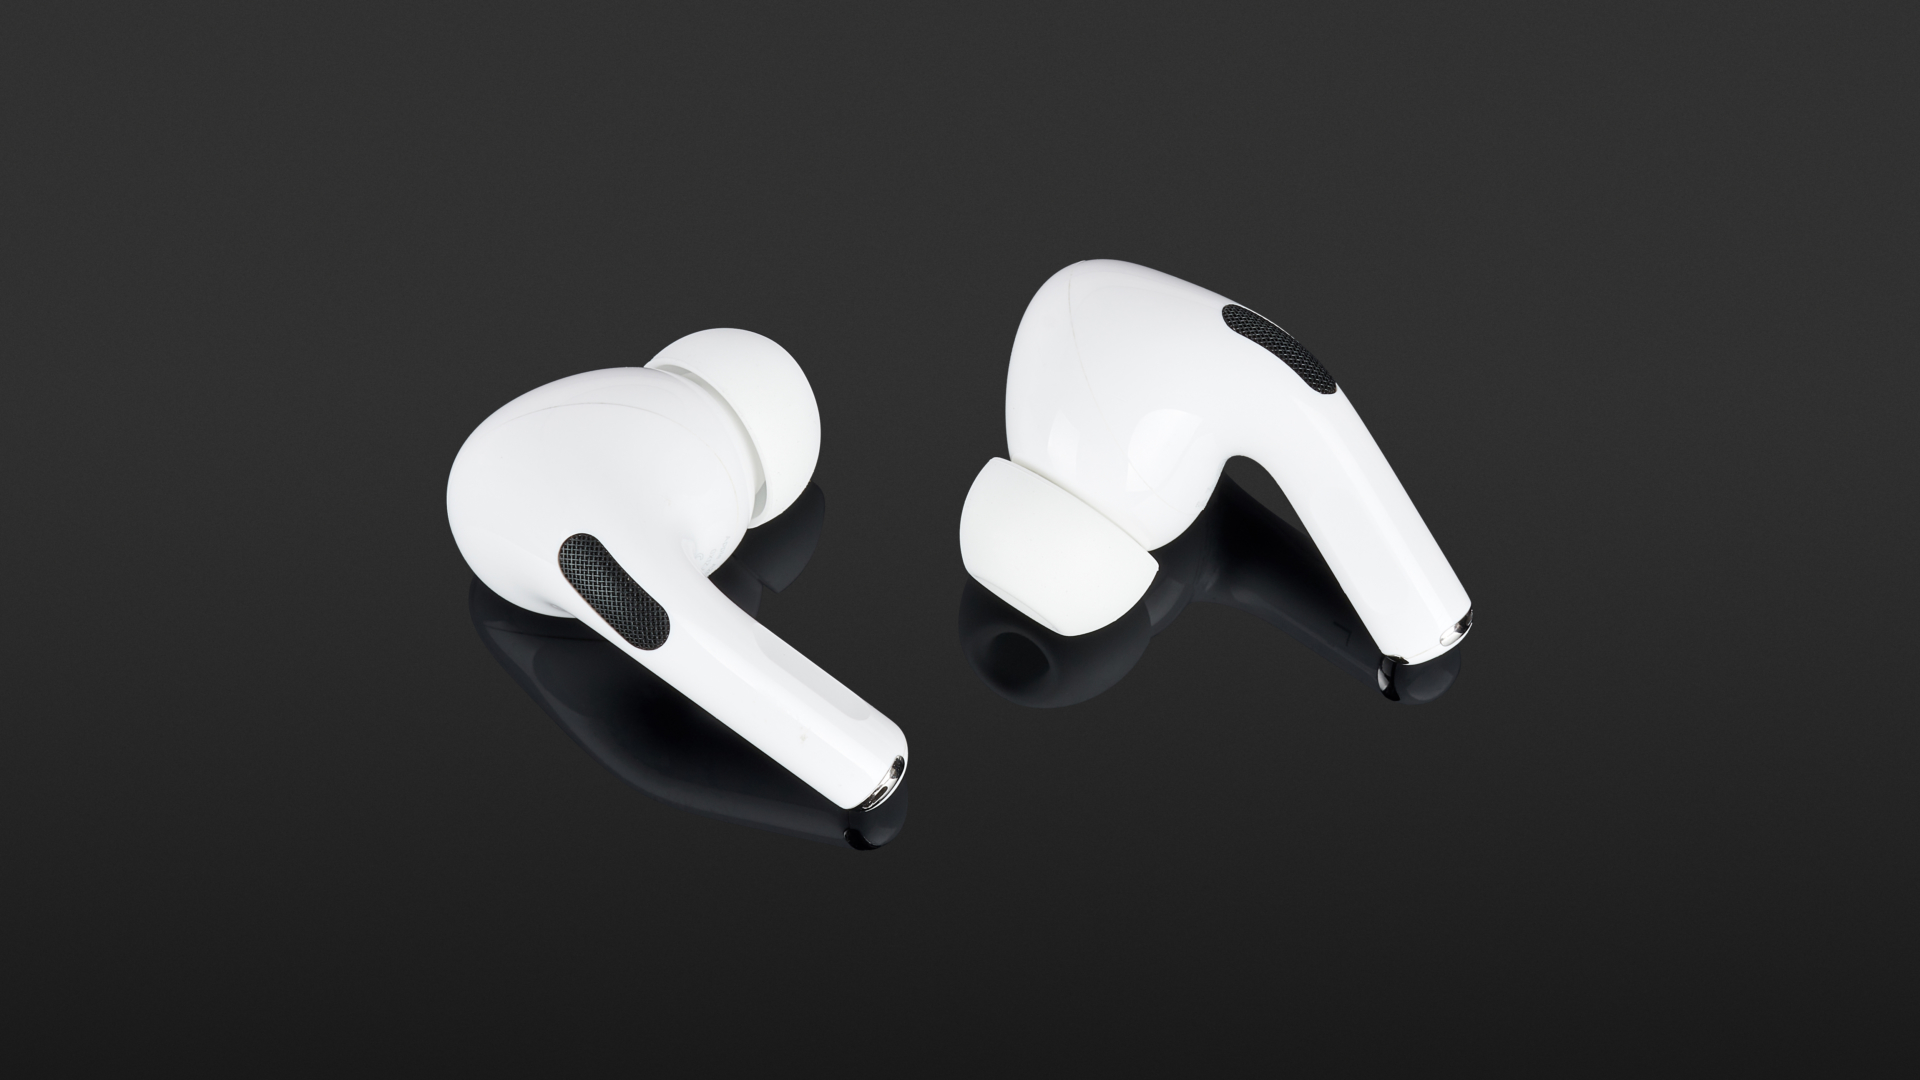 Airpods air pro. Наушники Air pods Pro 2. Apple AIRPODS Pro 2020. Apple AIRPODS Pro 1. Наушники Apple AIRPODS Pro (2-го поколения, 2022).